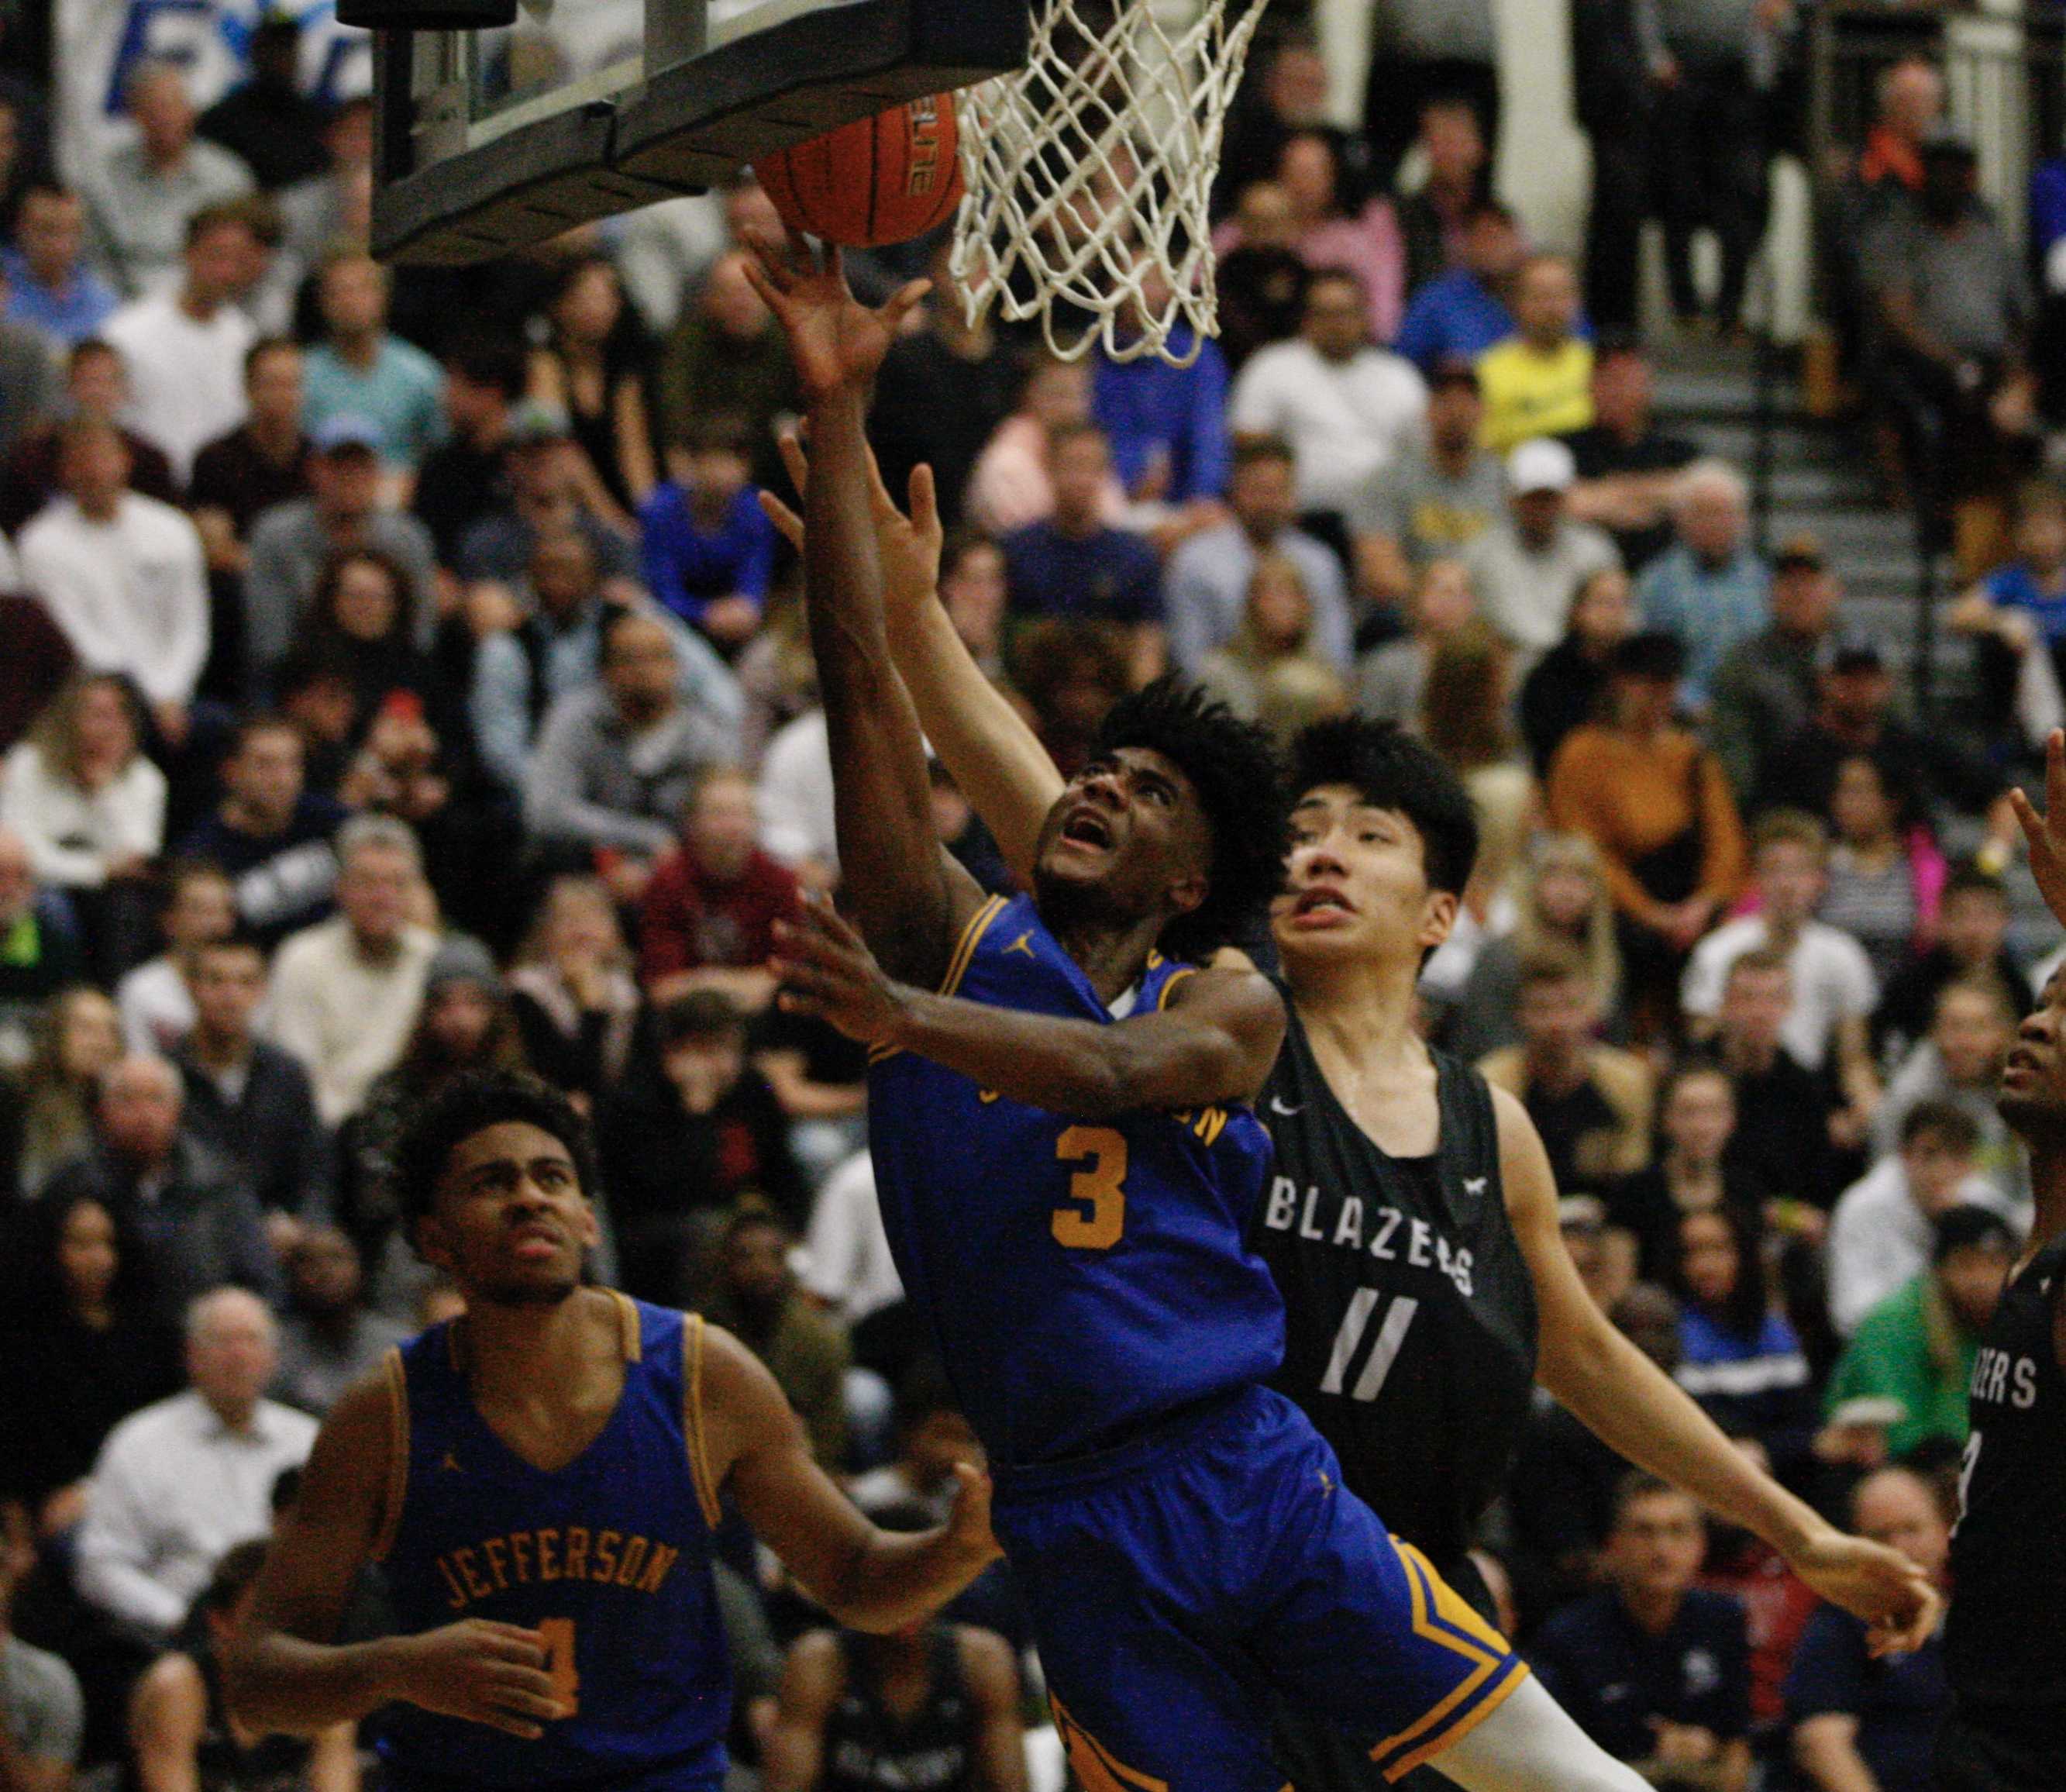 Jefferson's 6-4 Jalen Brown slashes past 7-2 Jia-Hao Yu of Sierra Canyon on his way to a layup. (Photo by Norm Maves Jr.)